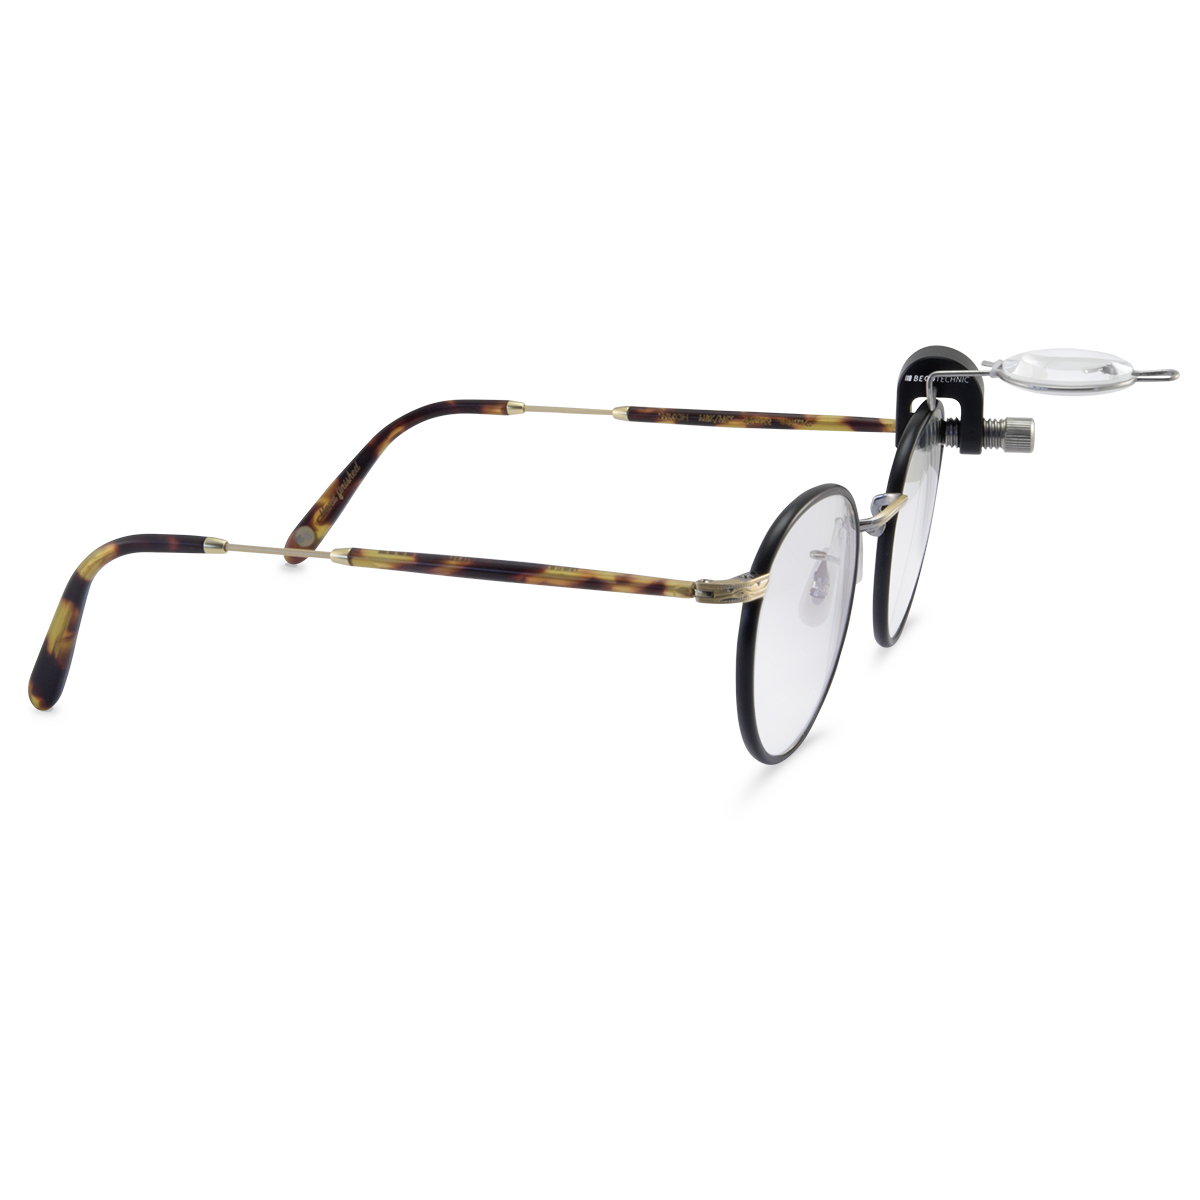 Magnifying glass for spectacles, 4x, left